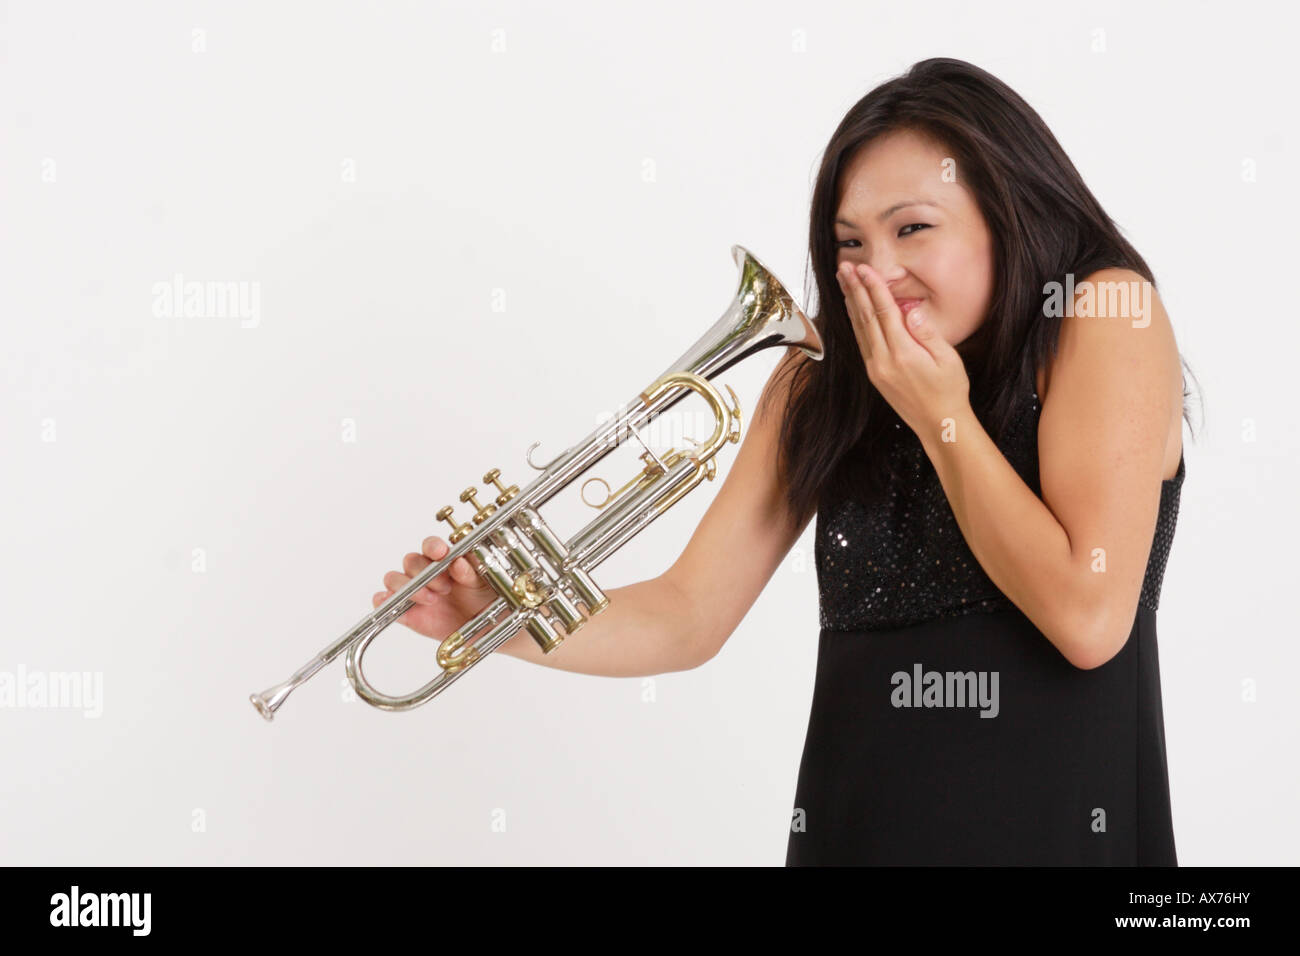 Stock Photograph of a Asian girl laughing while playing with a trumpet Stock Photo